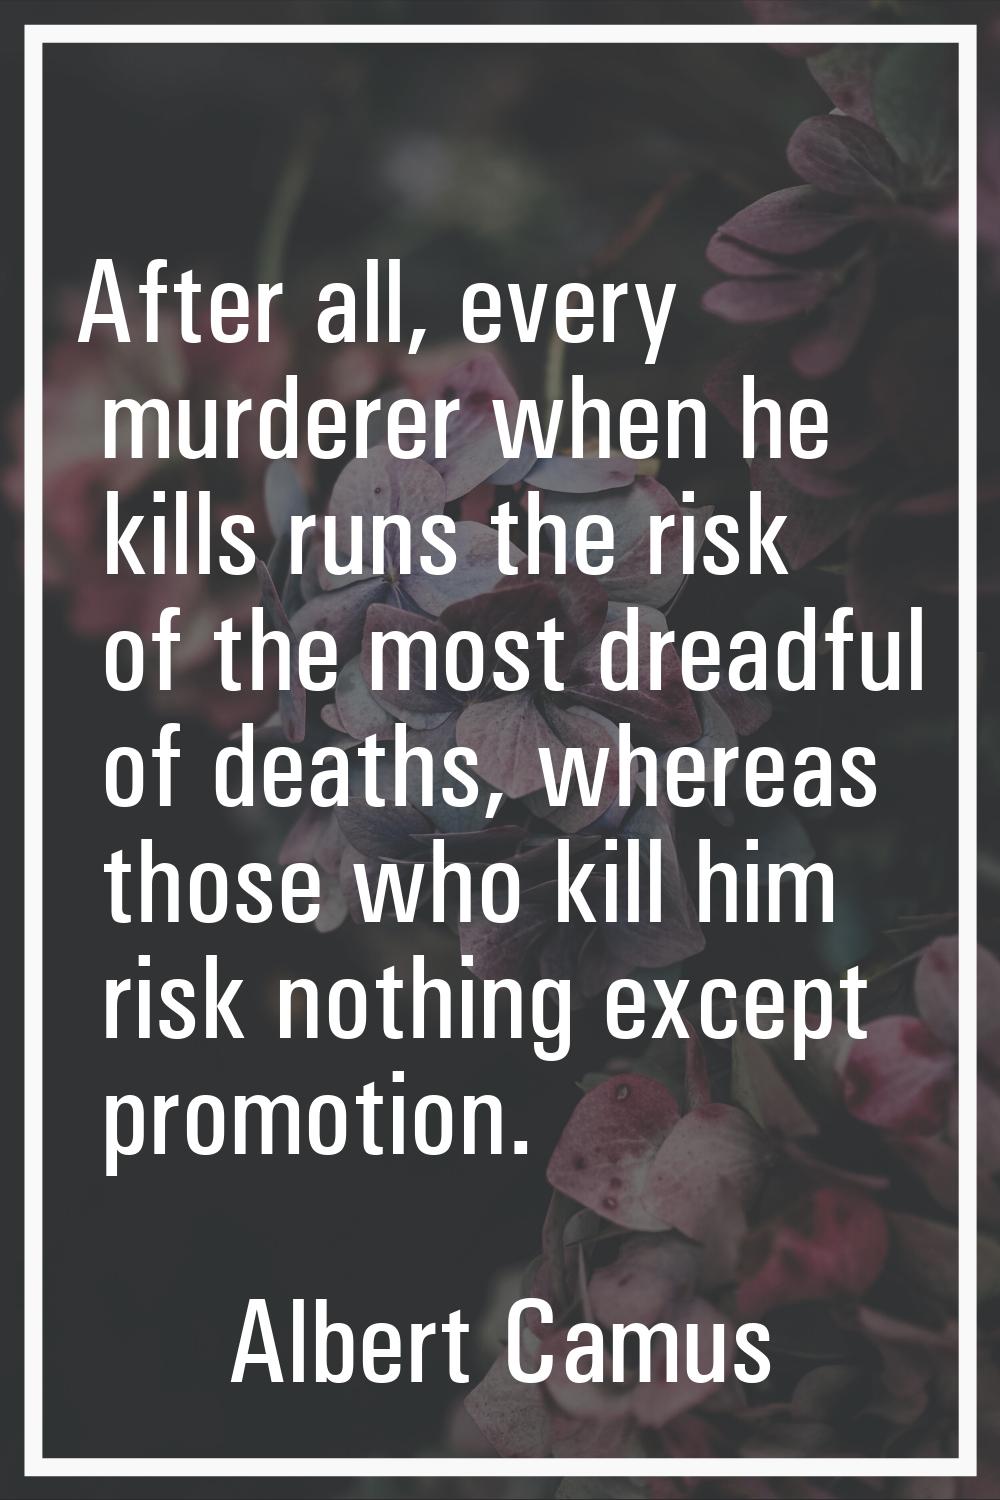 After all, every murderer when he kills runs the risk of the most dreadful of deaths, whereas those